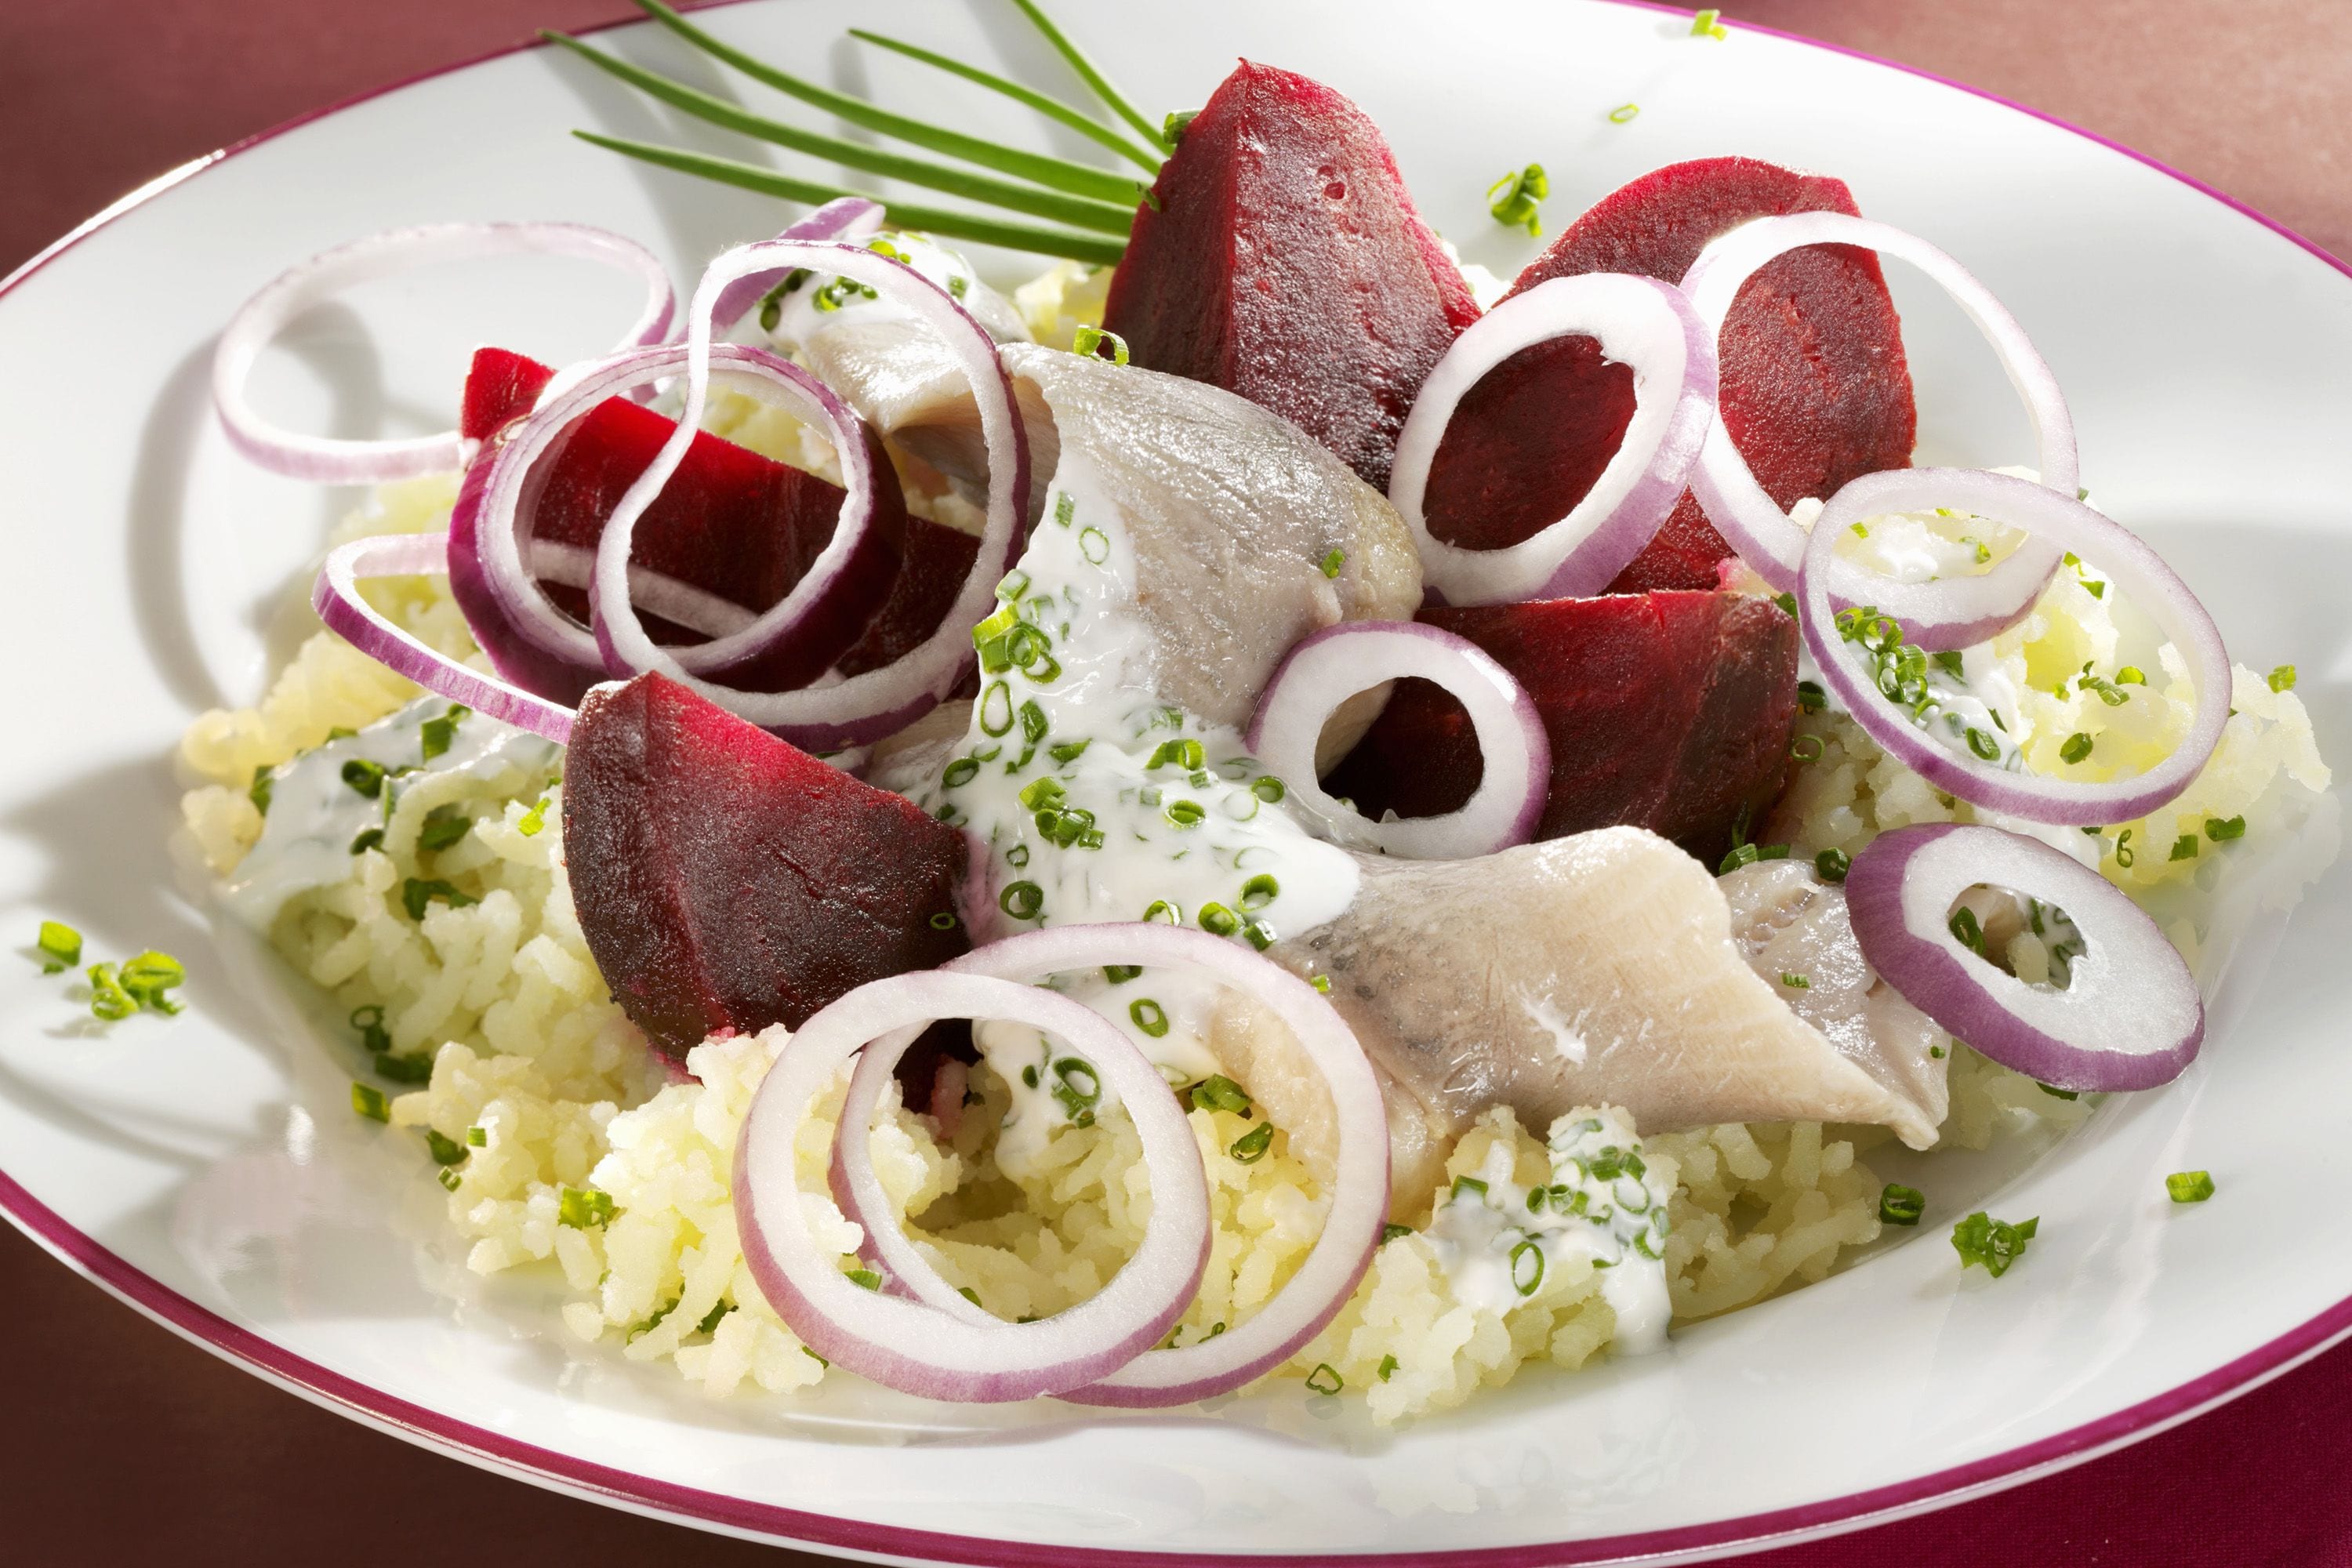 Young herring (Matjes) with beetroot and mashed potatoes - FreshMAG